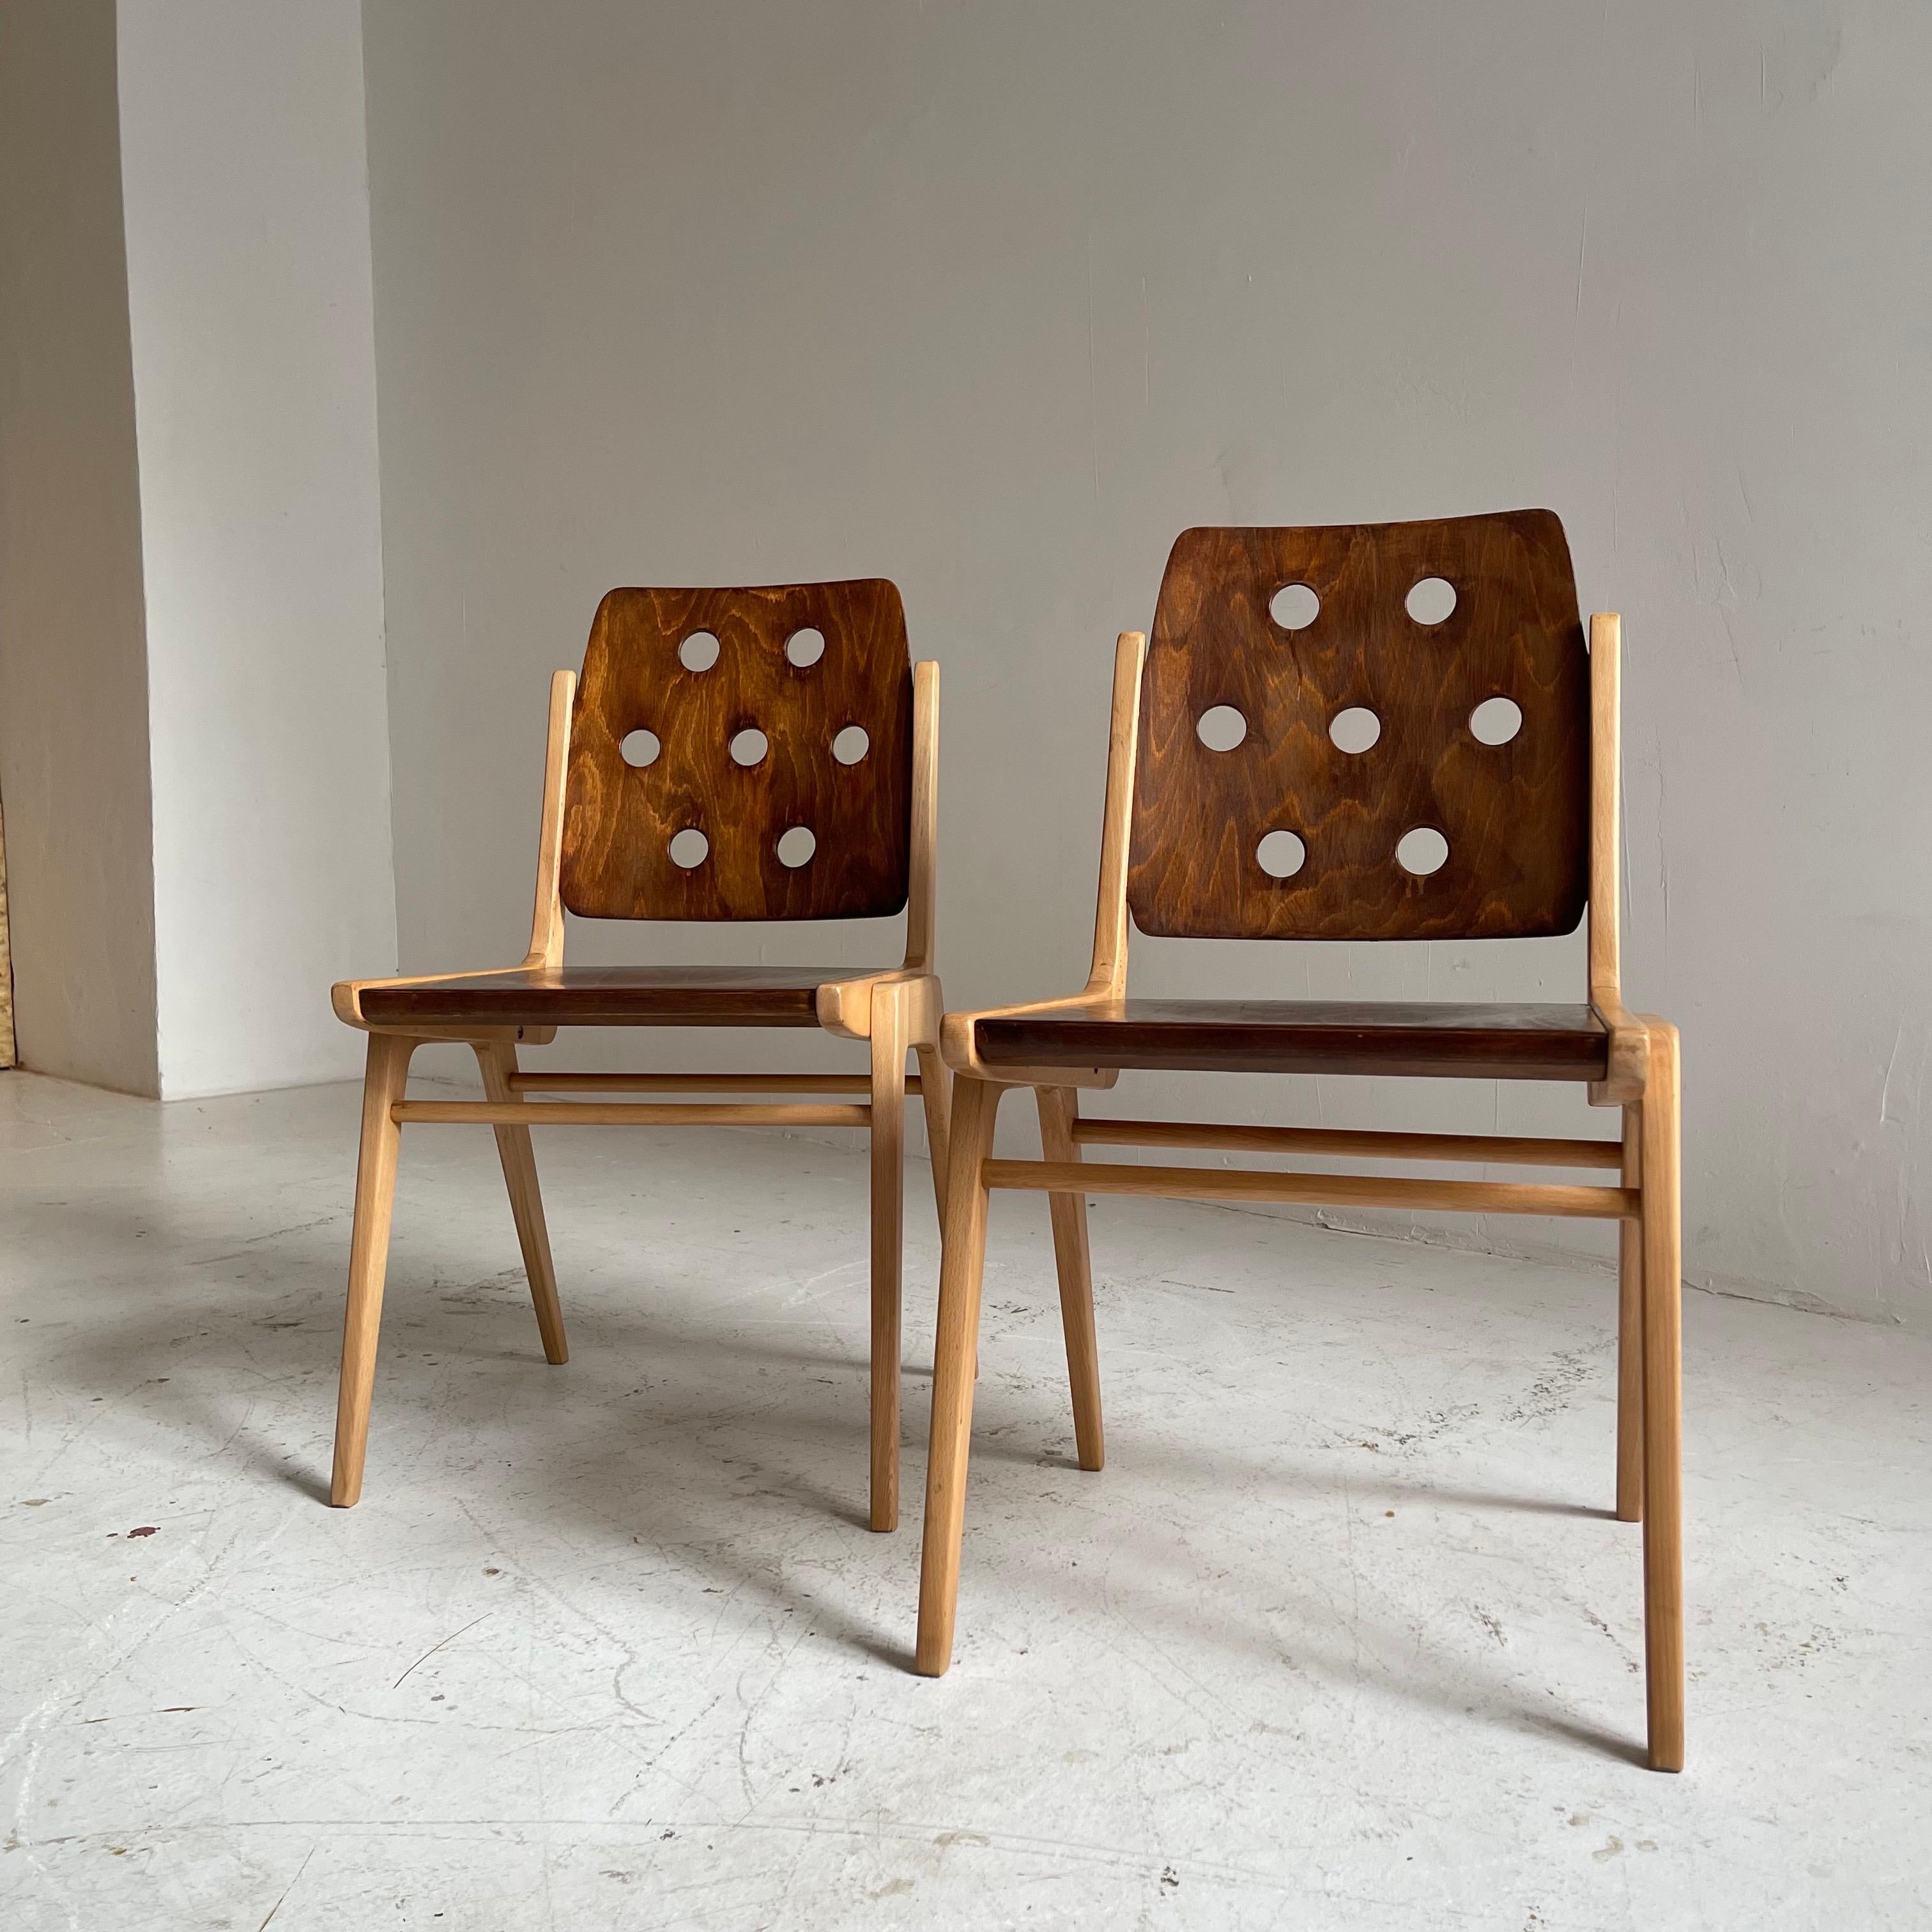 Franz Schuster Stacking Chair Set of Two, Austria 1955 In Good Condition For Sale In Vienna, AT